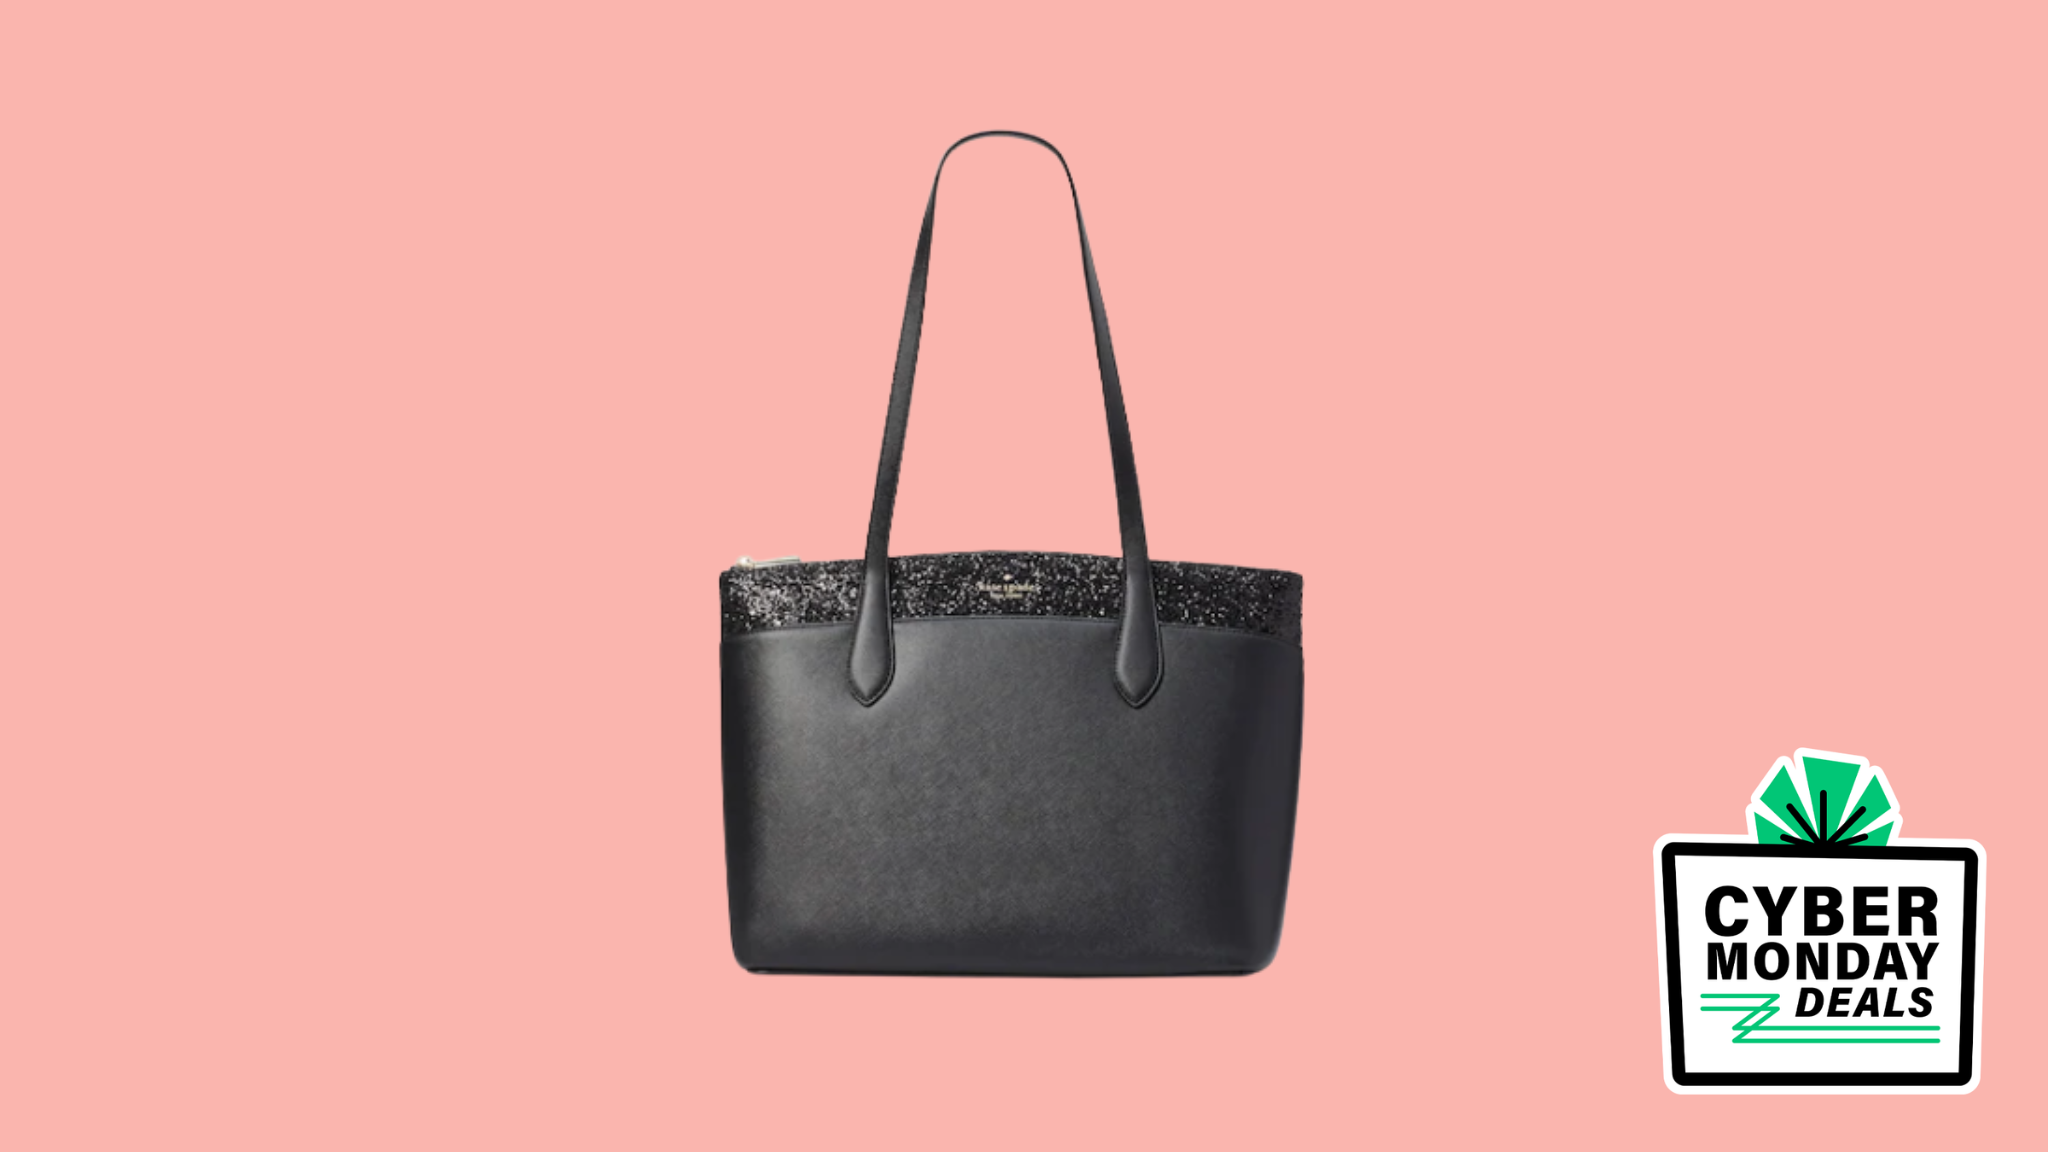 Shop today only for $20 off the Flash Glitter tote at Kate Spade